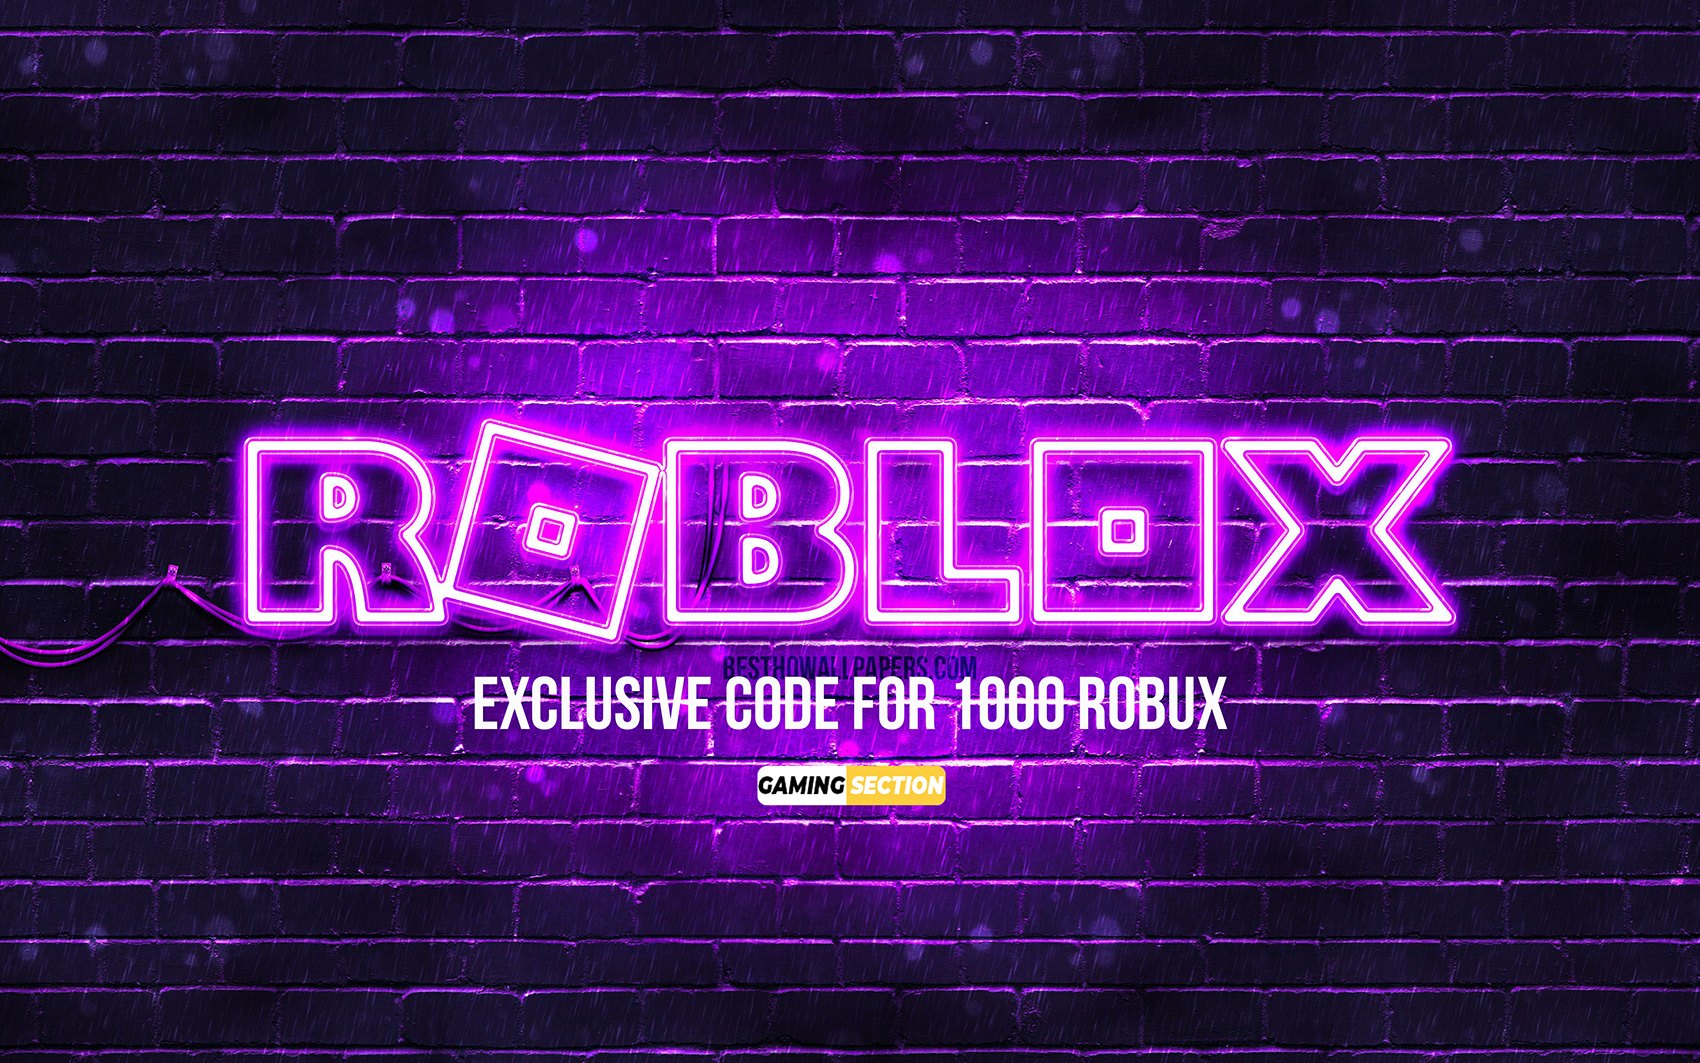 What s The Code For 1000 Robux Gaming Section Magazine Gaming E 